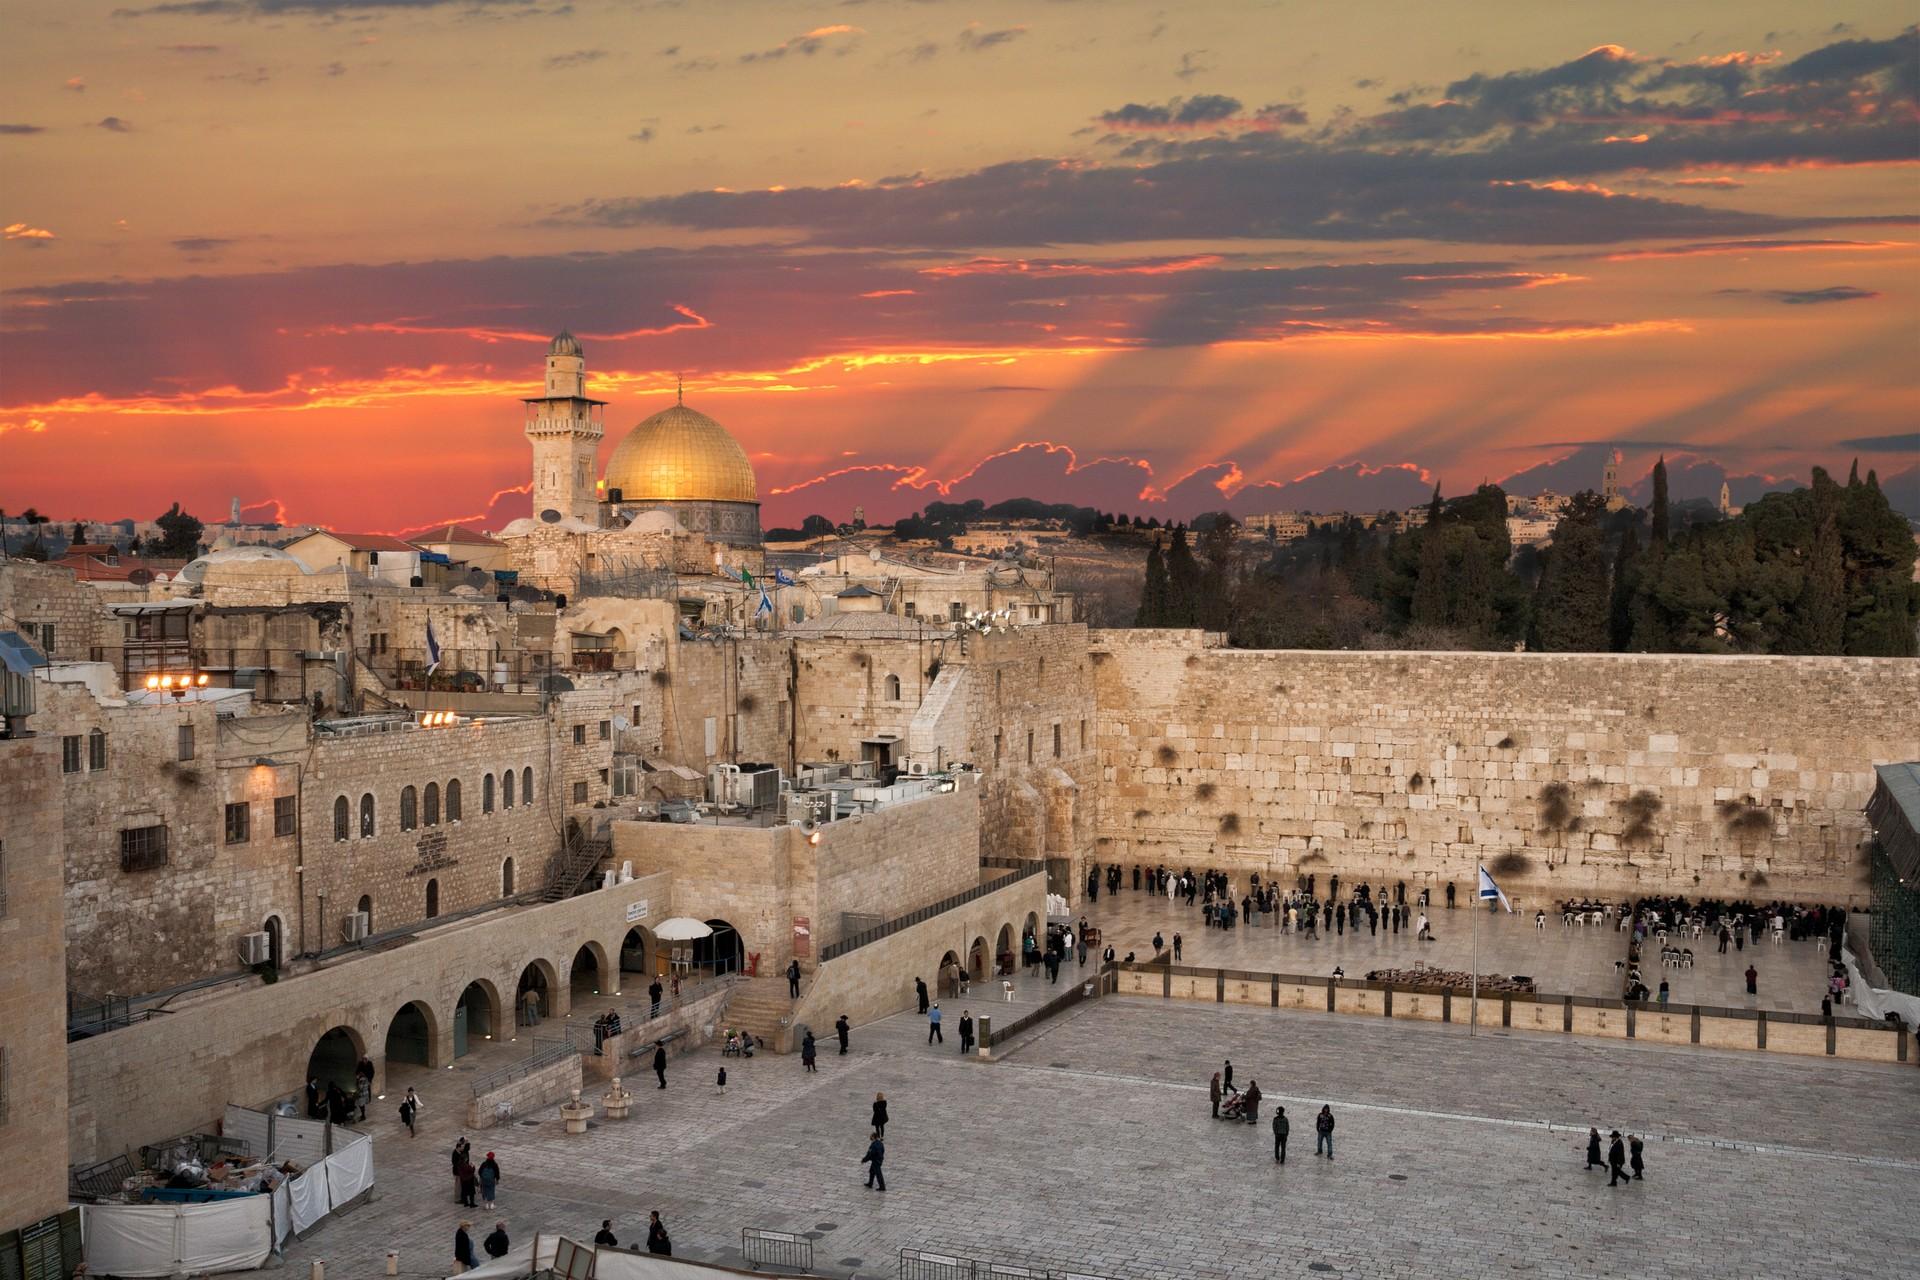 Architecture in Jerusalem at sunset time